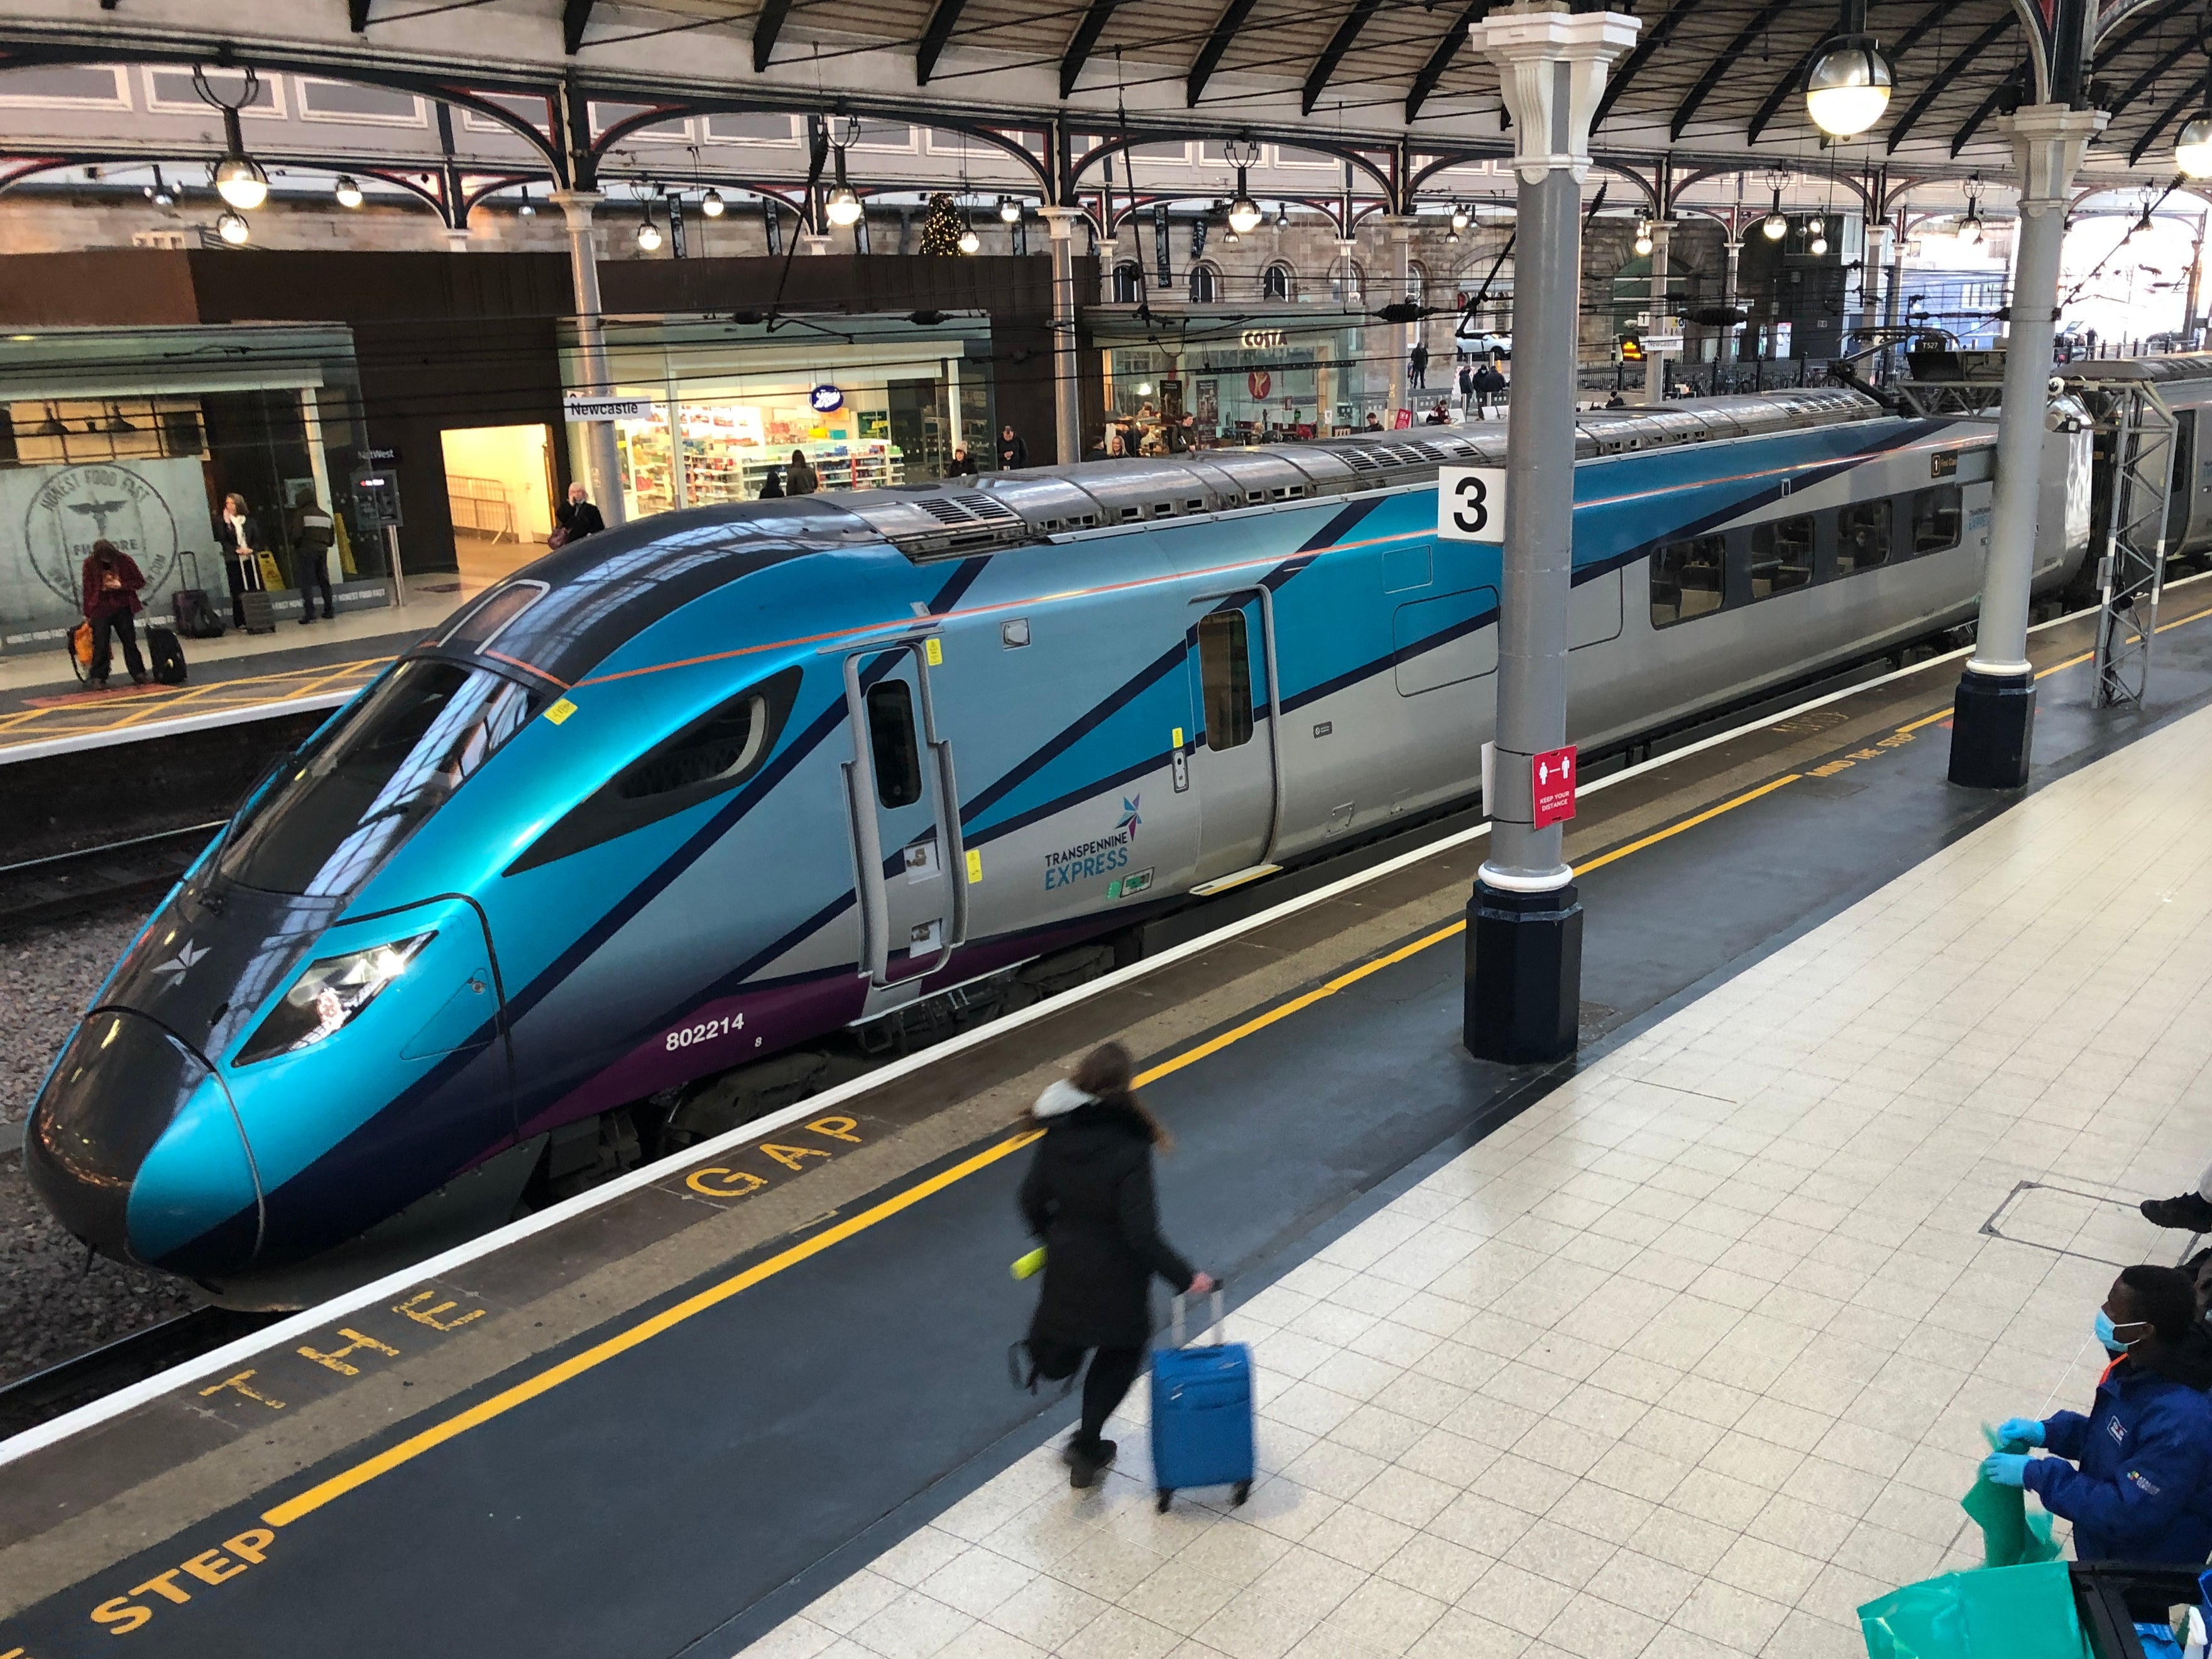 Departing soon? TransPennine Express train at Newcastle station